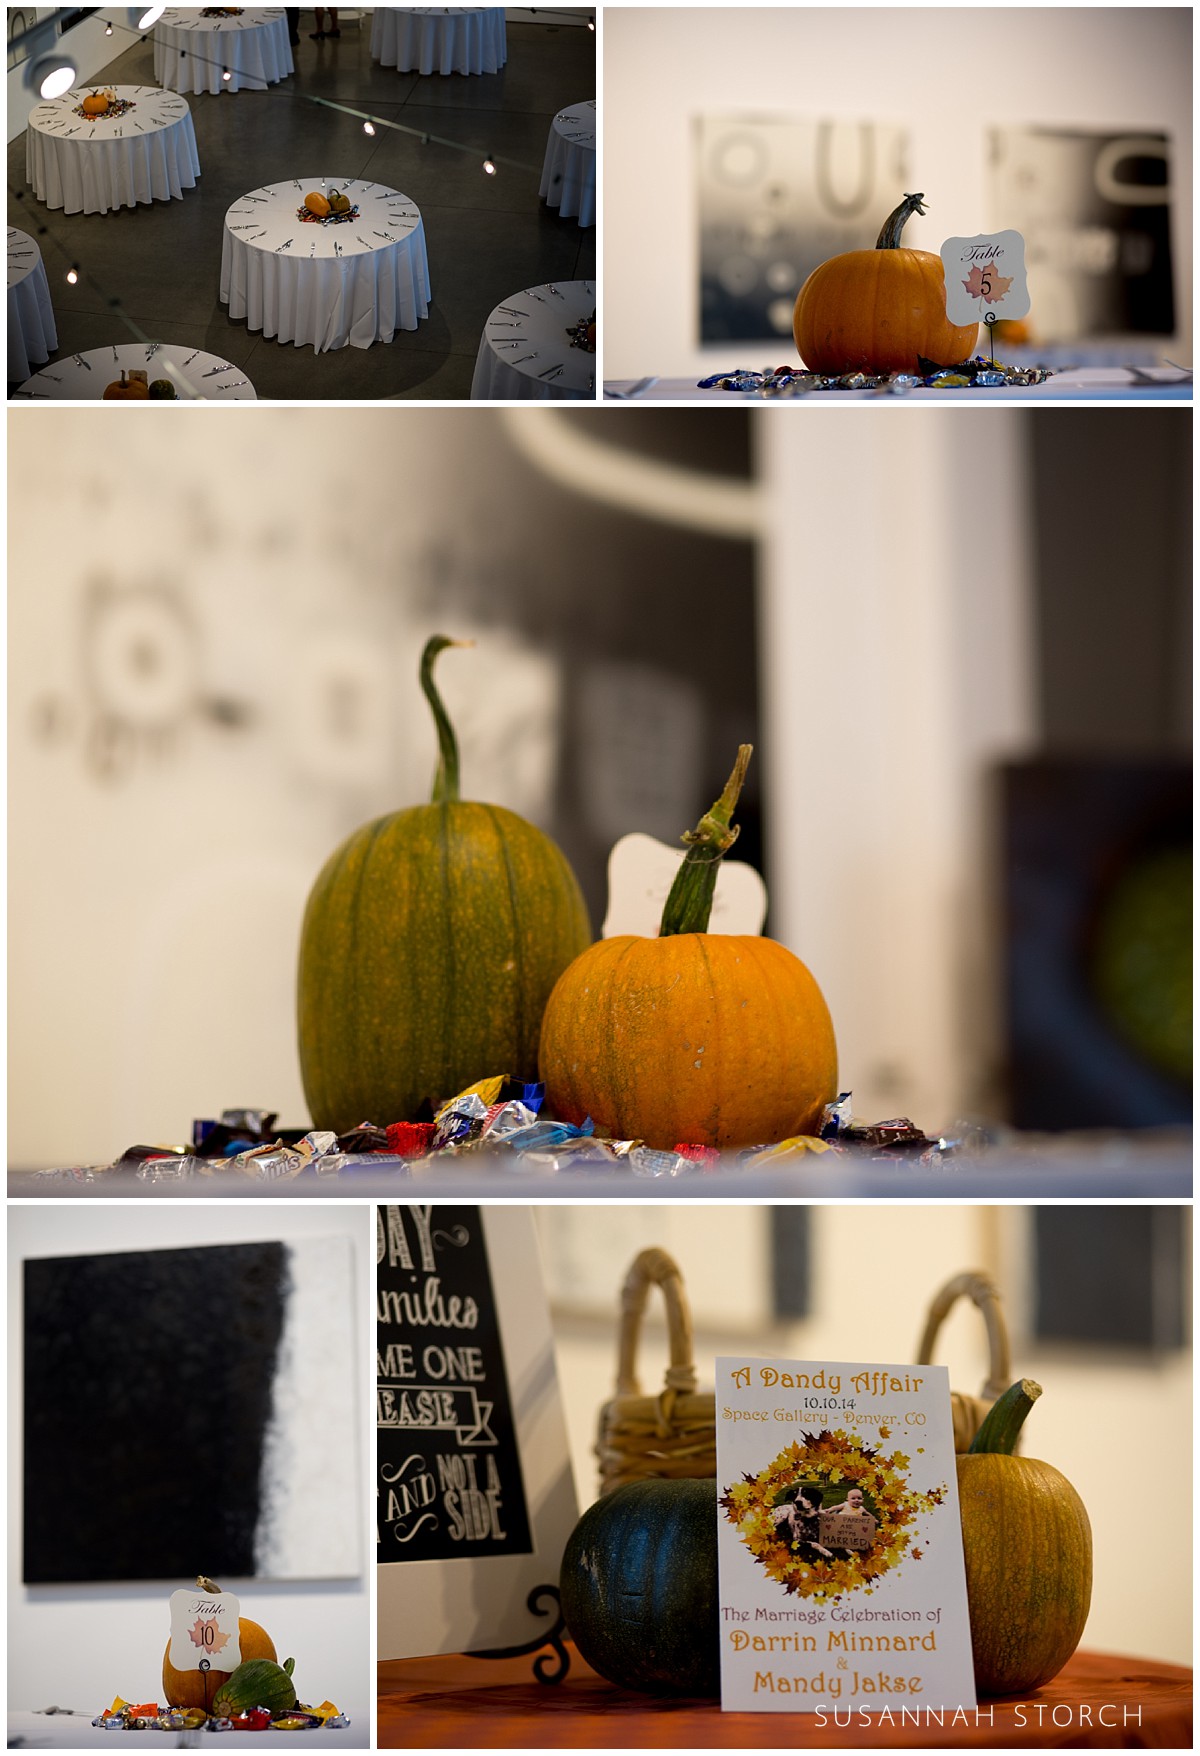 5 images of tablescapes featuring pumpkins